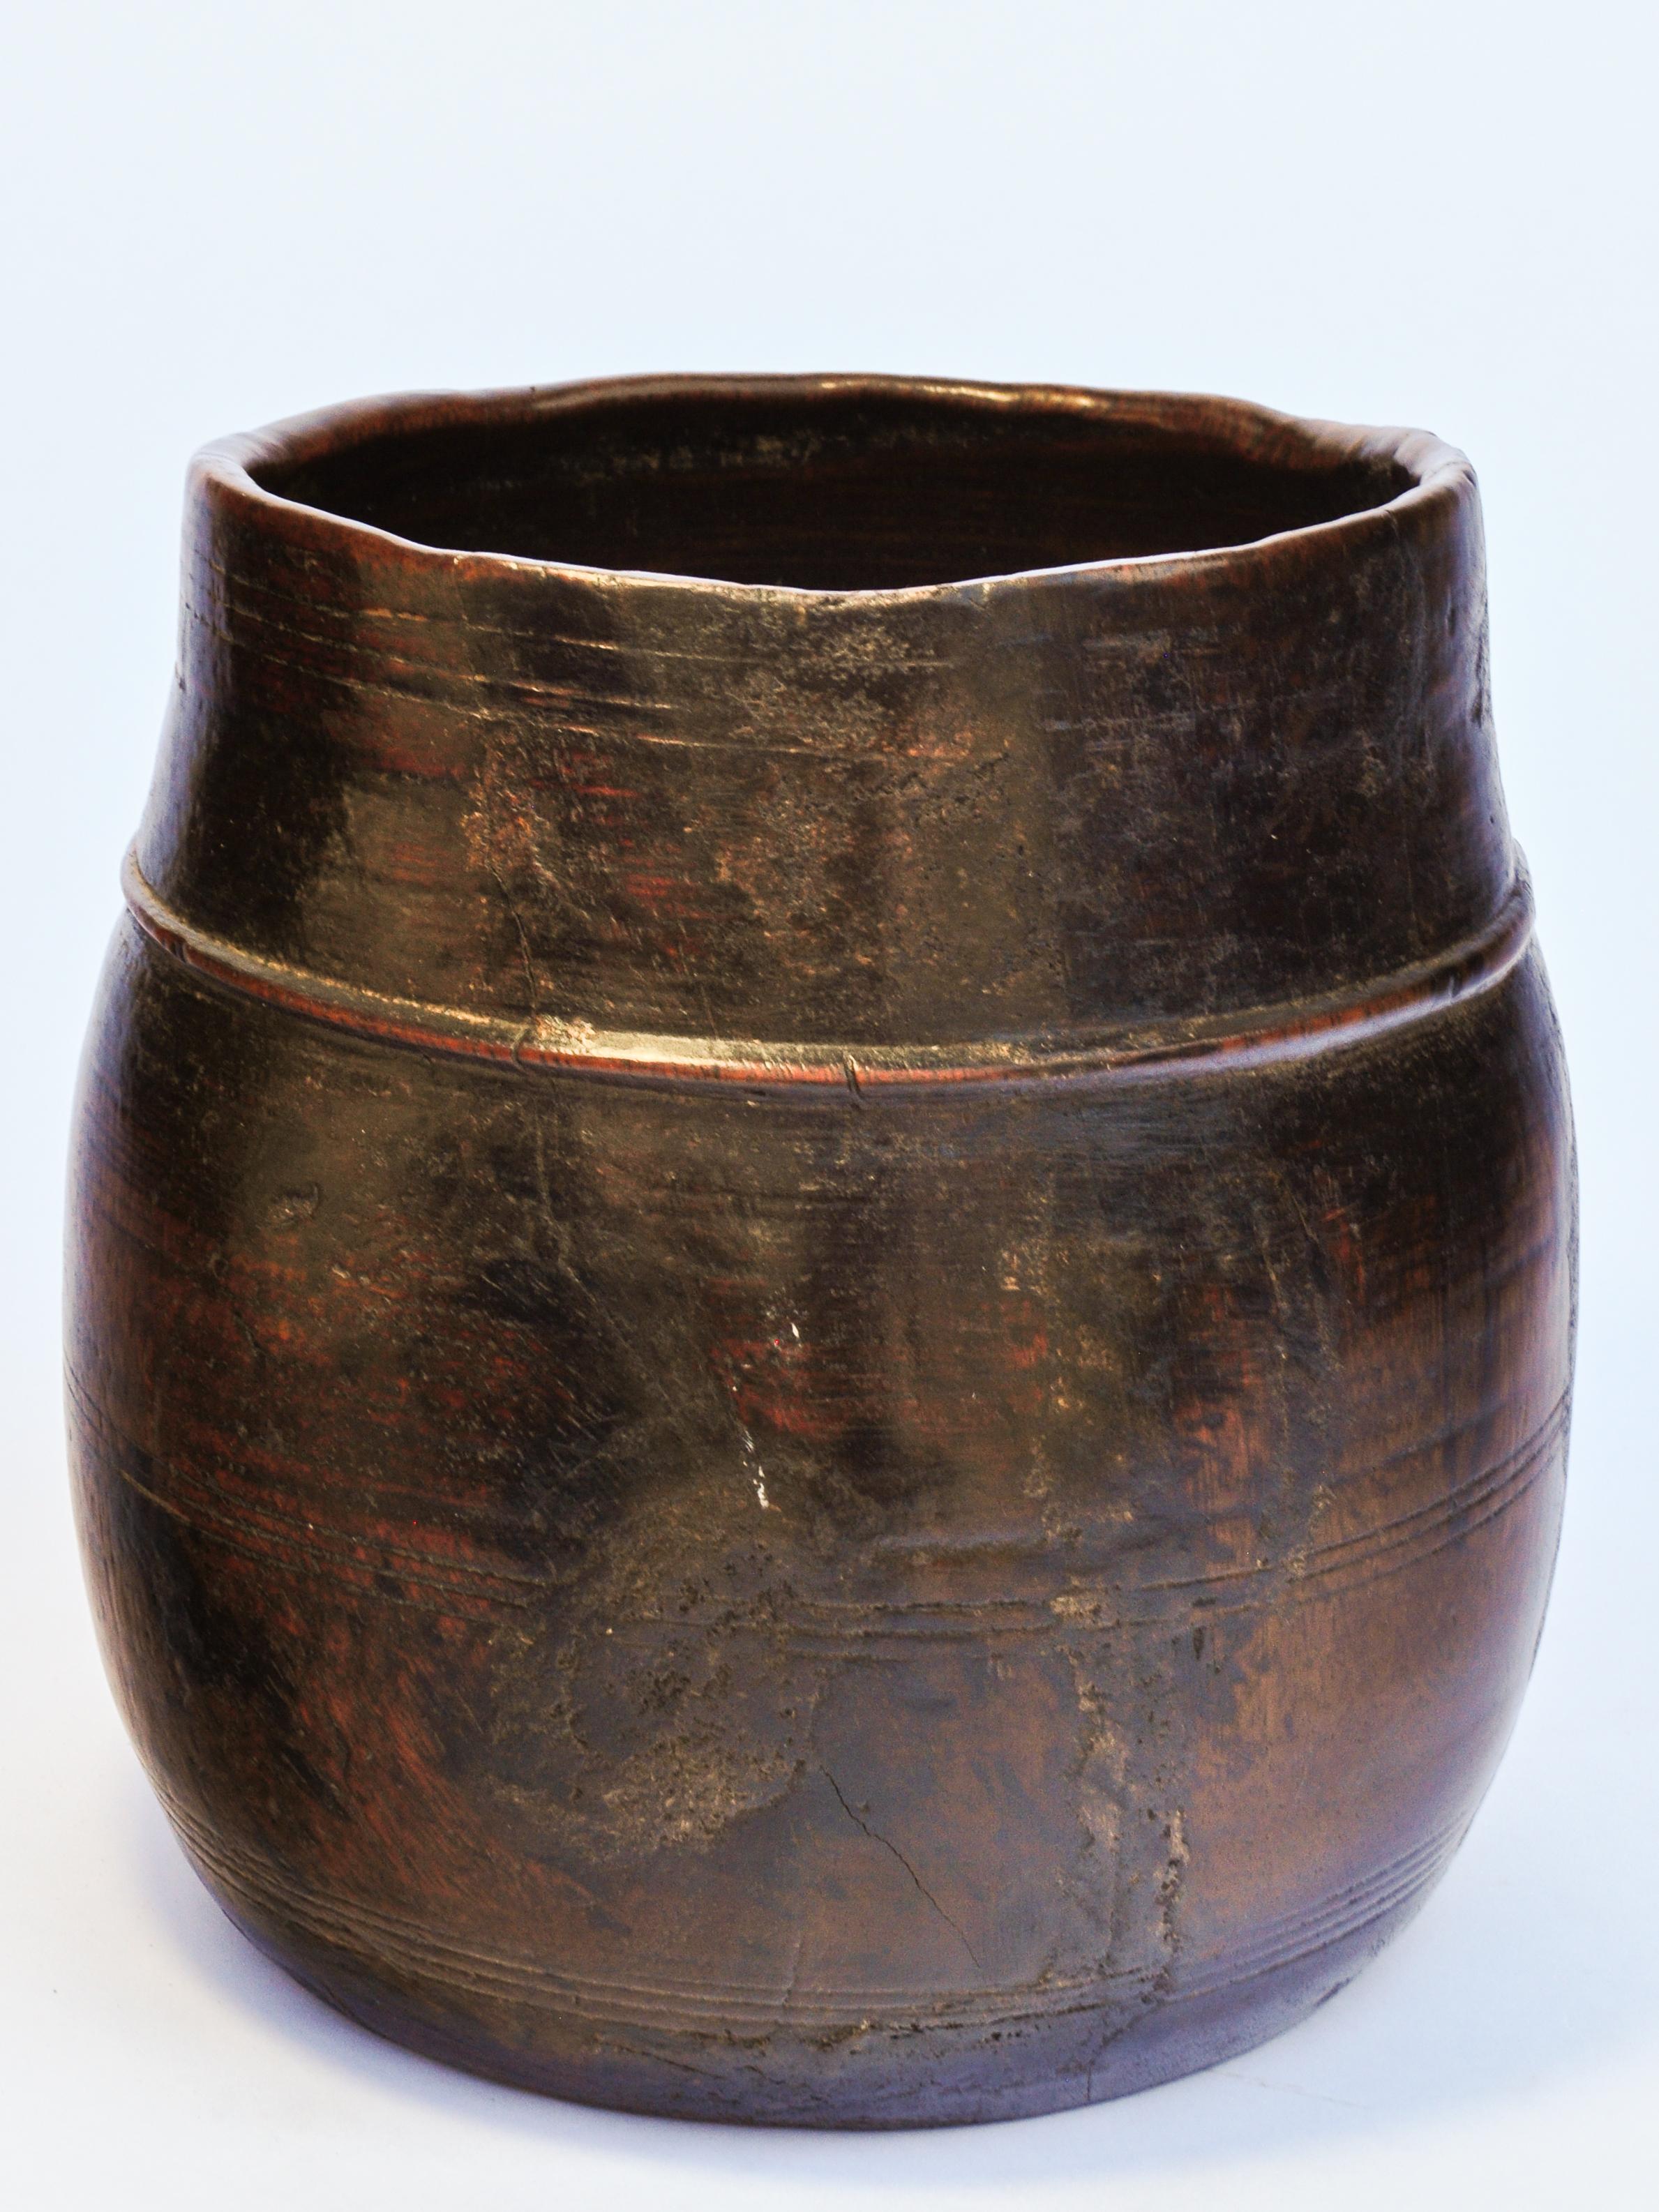 Hand-Crafted Vintage Wooden Grain Measure Pot from the Mountains of Nepal, Mid-20th Century